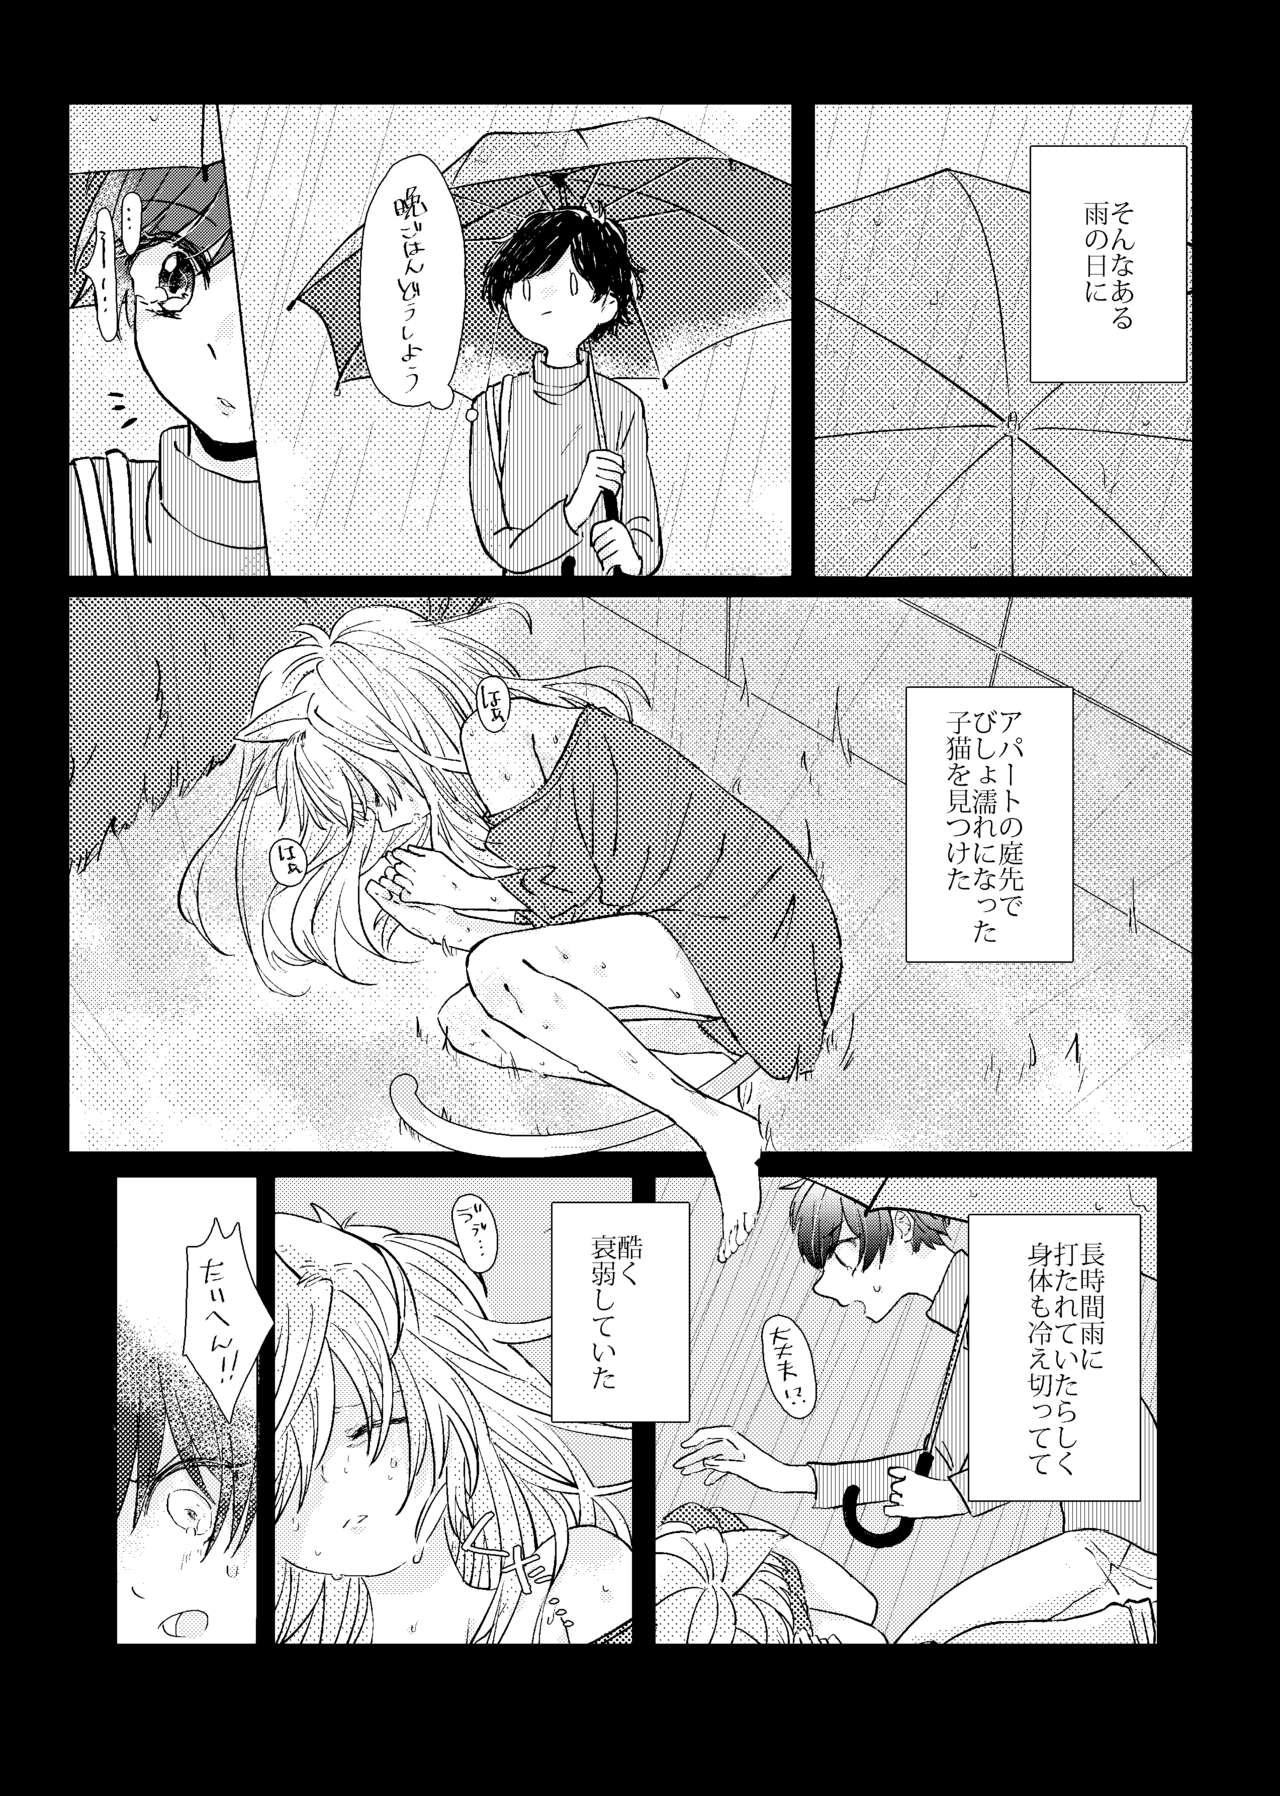 Trap MY SWEET SWEET CATGIRL!! - Banana fish Best Blowjobs Ever - Page 6